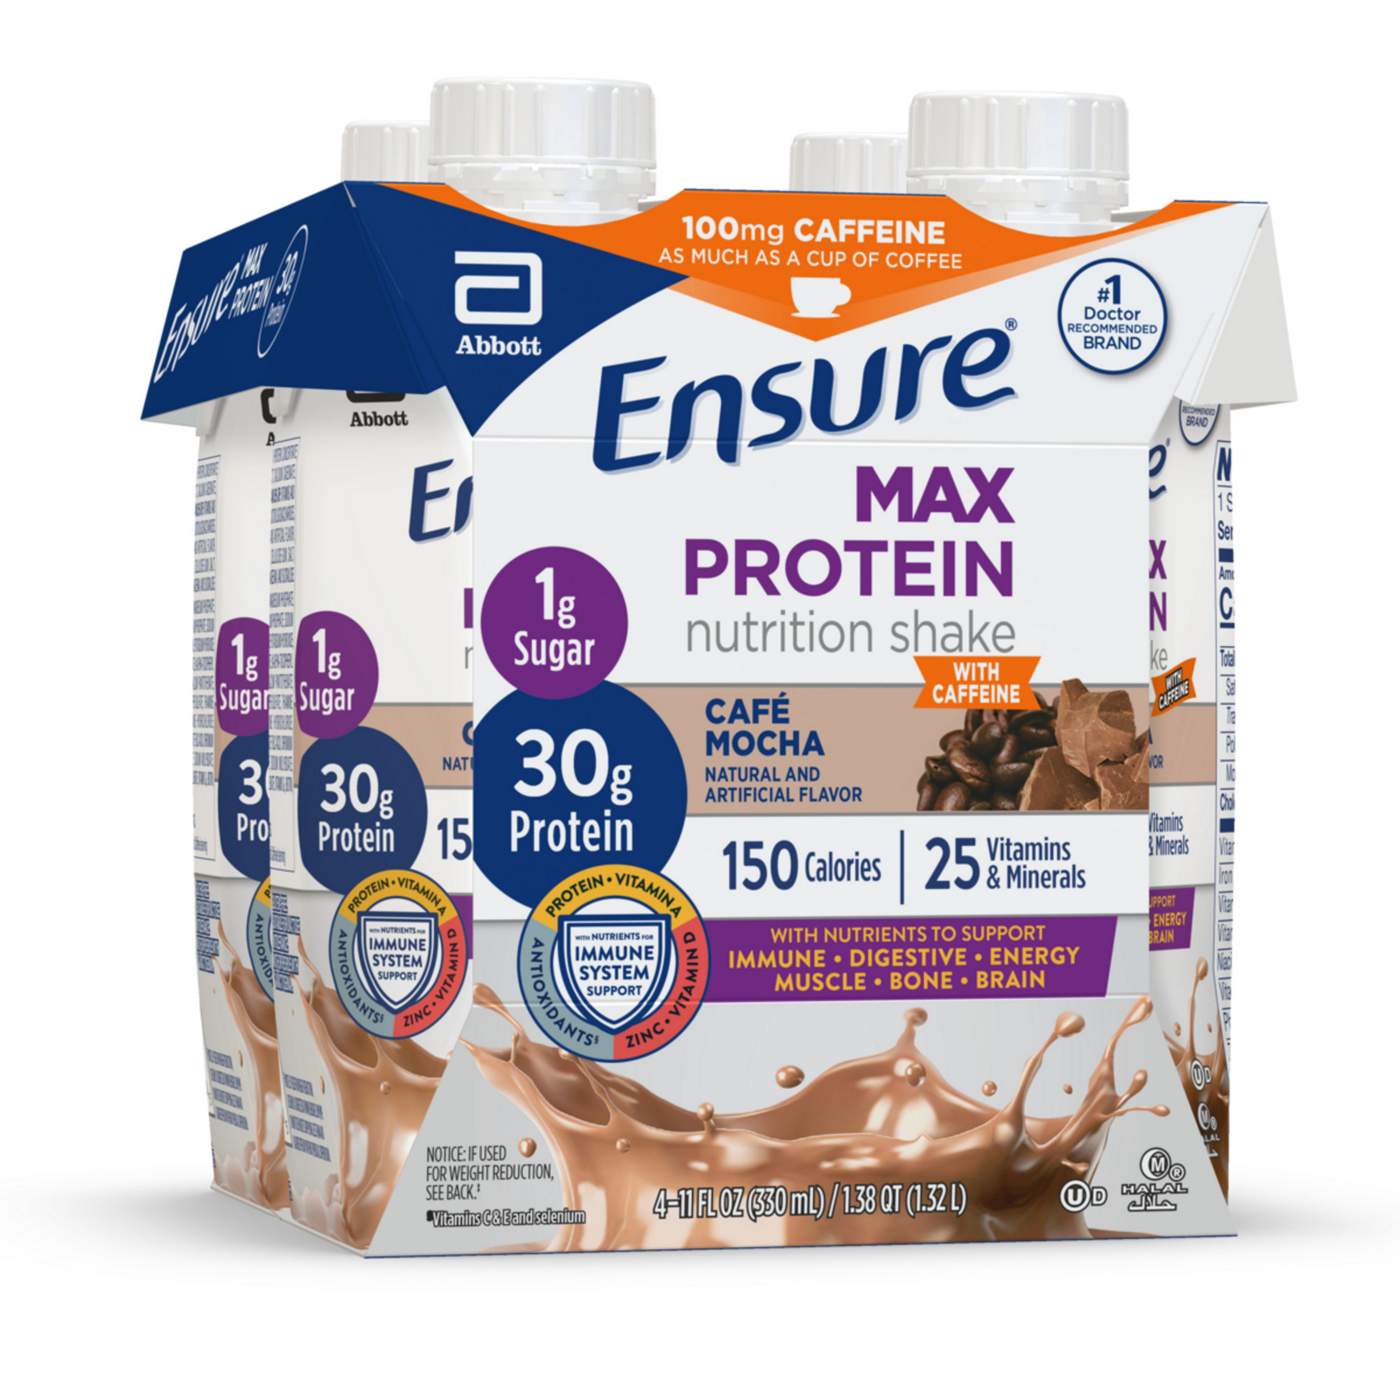 Ensure Max Protein Nutrition Shake Cafe Mocha 4 pk Ready-to-Drink; image 10 of 13